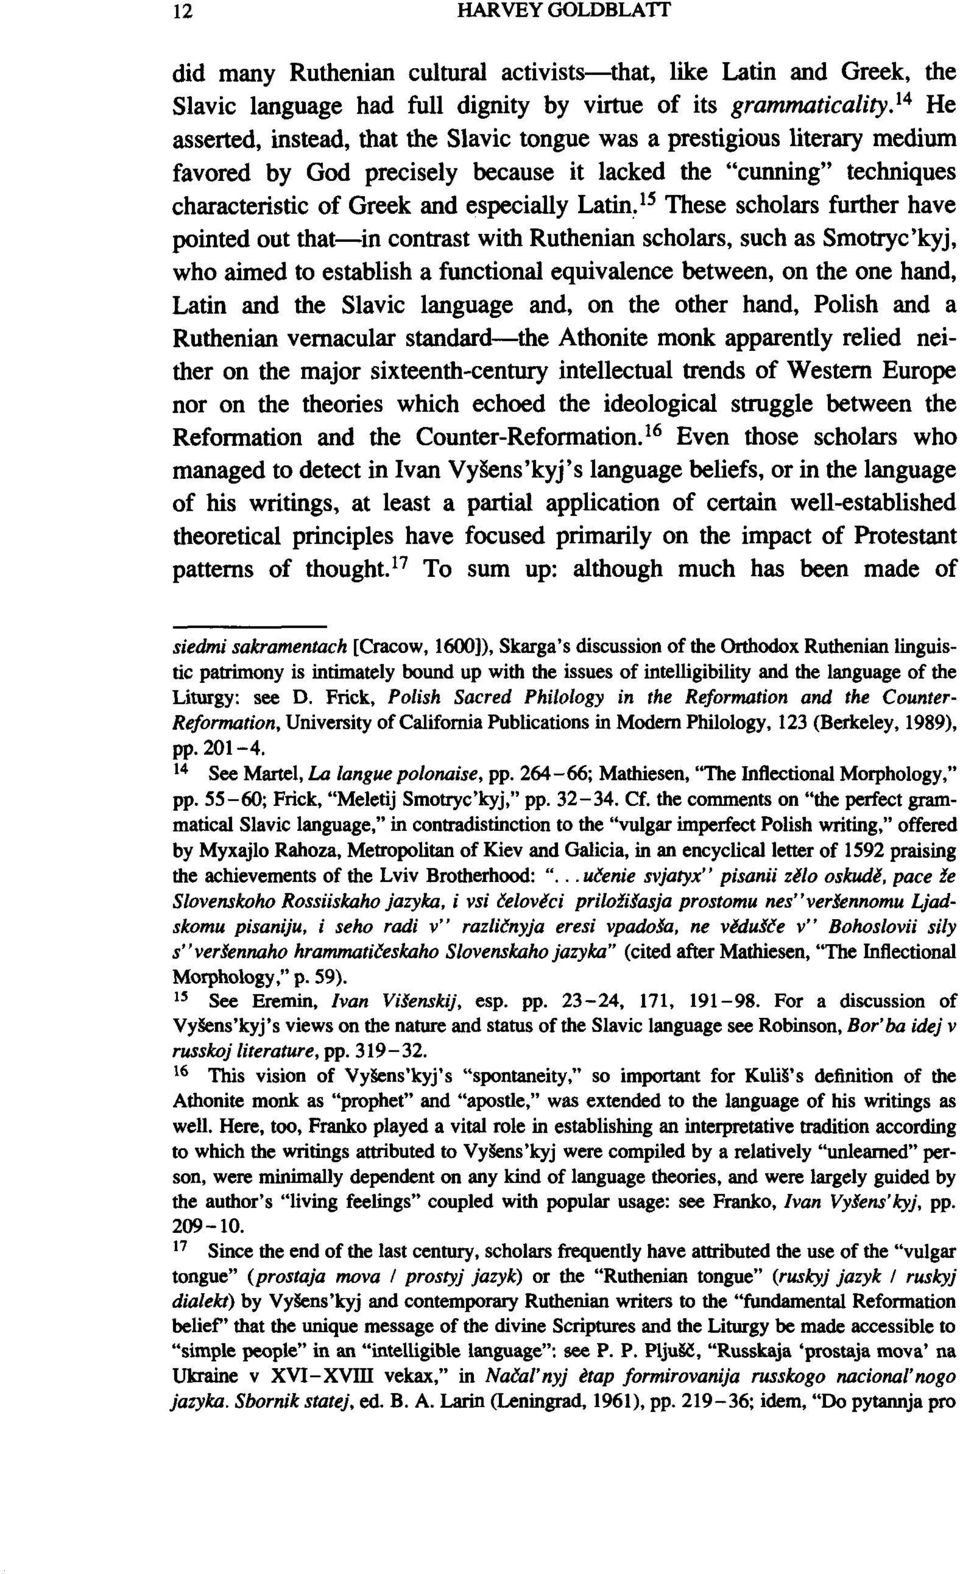 15 These scholars further have pointed out that in contrast with Ruthenian scholars, such as Smotryc'kyj, who aimed to establish a functional equivalence between, on the one hand, Latin and the